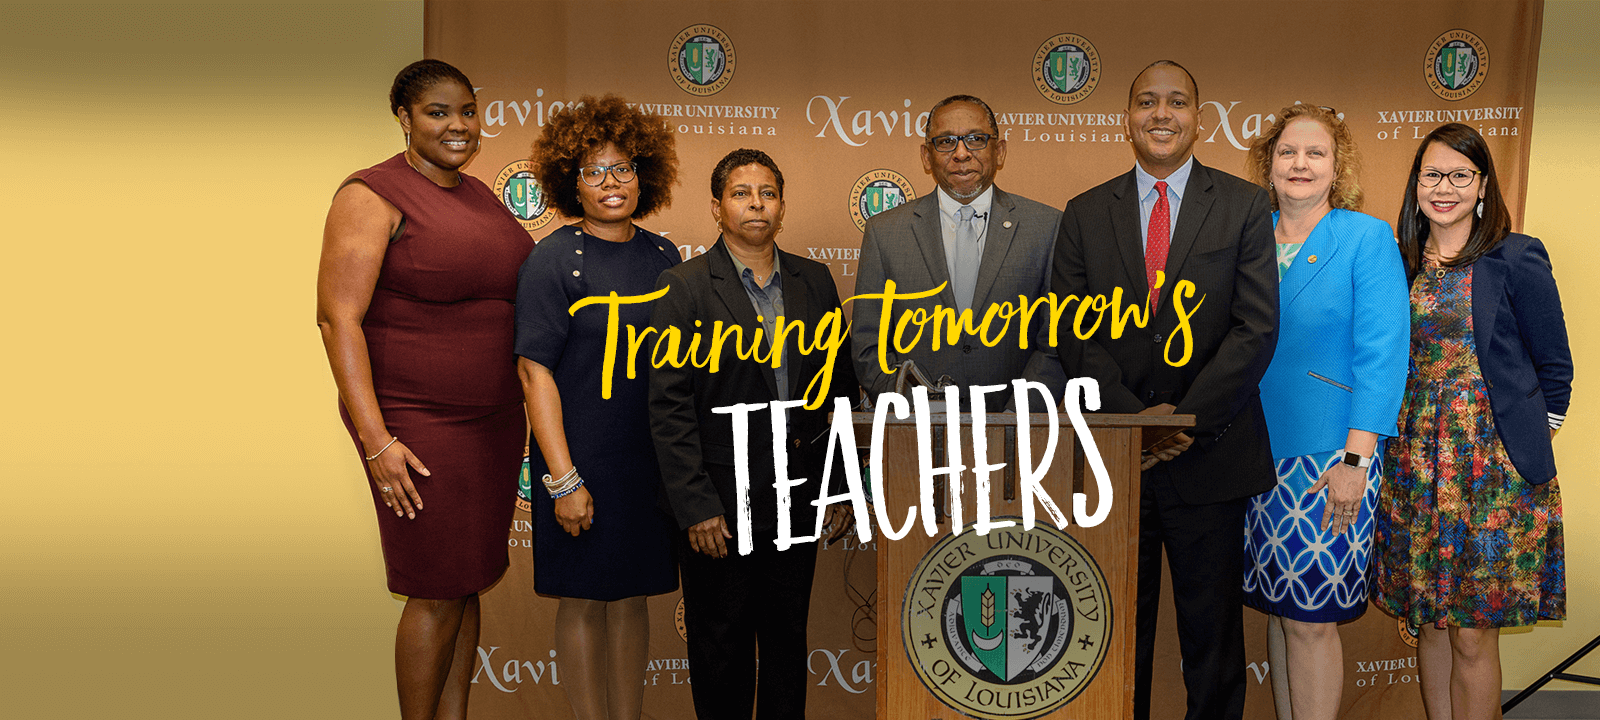 New Orleans Education Organizations awarded nearly $13,000,000 to collaborate on strategy to recruit and train teachers